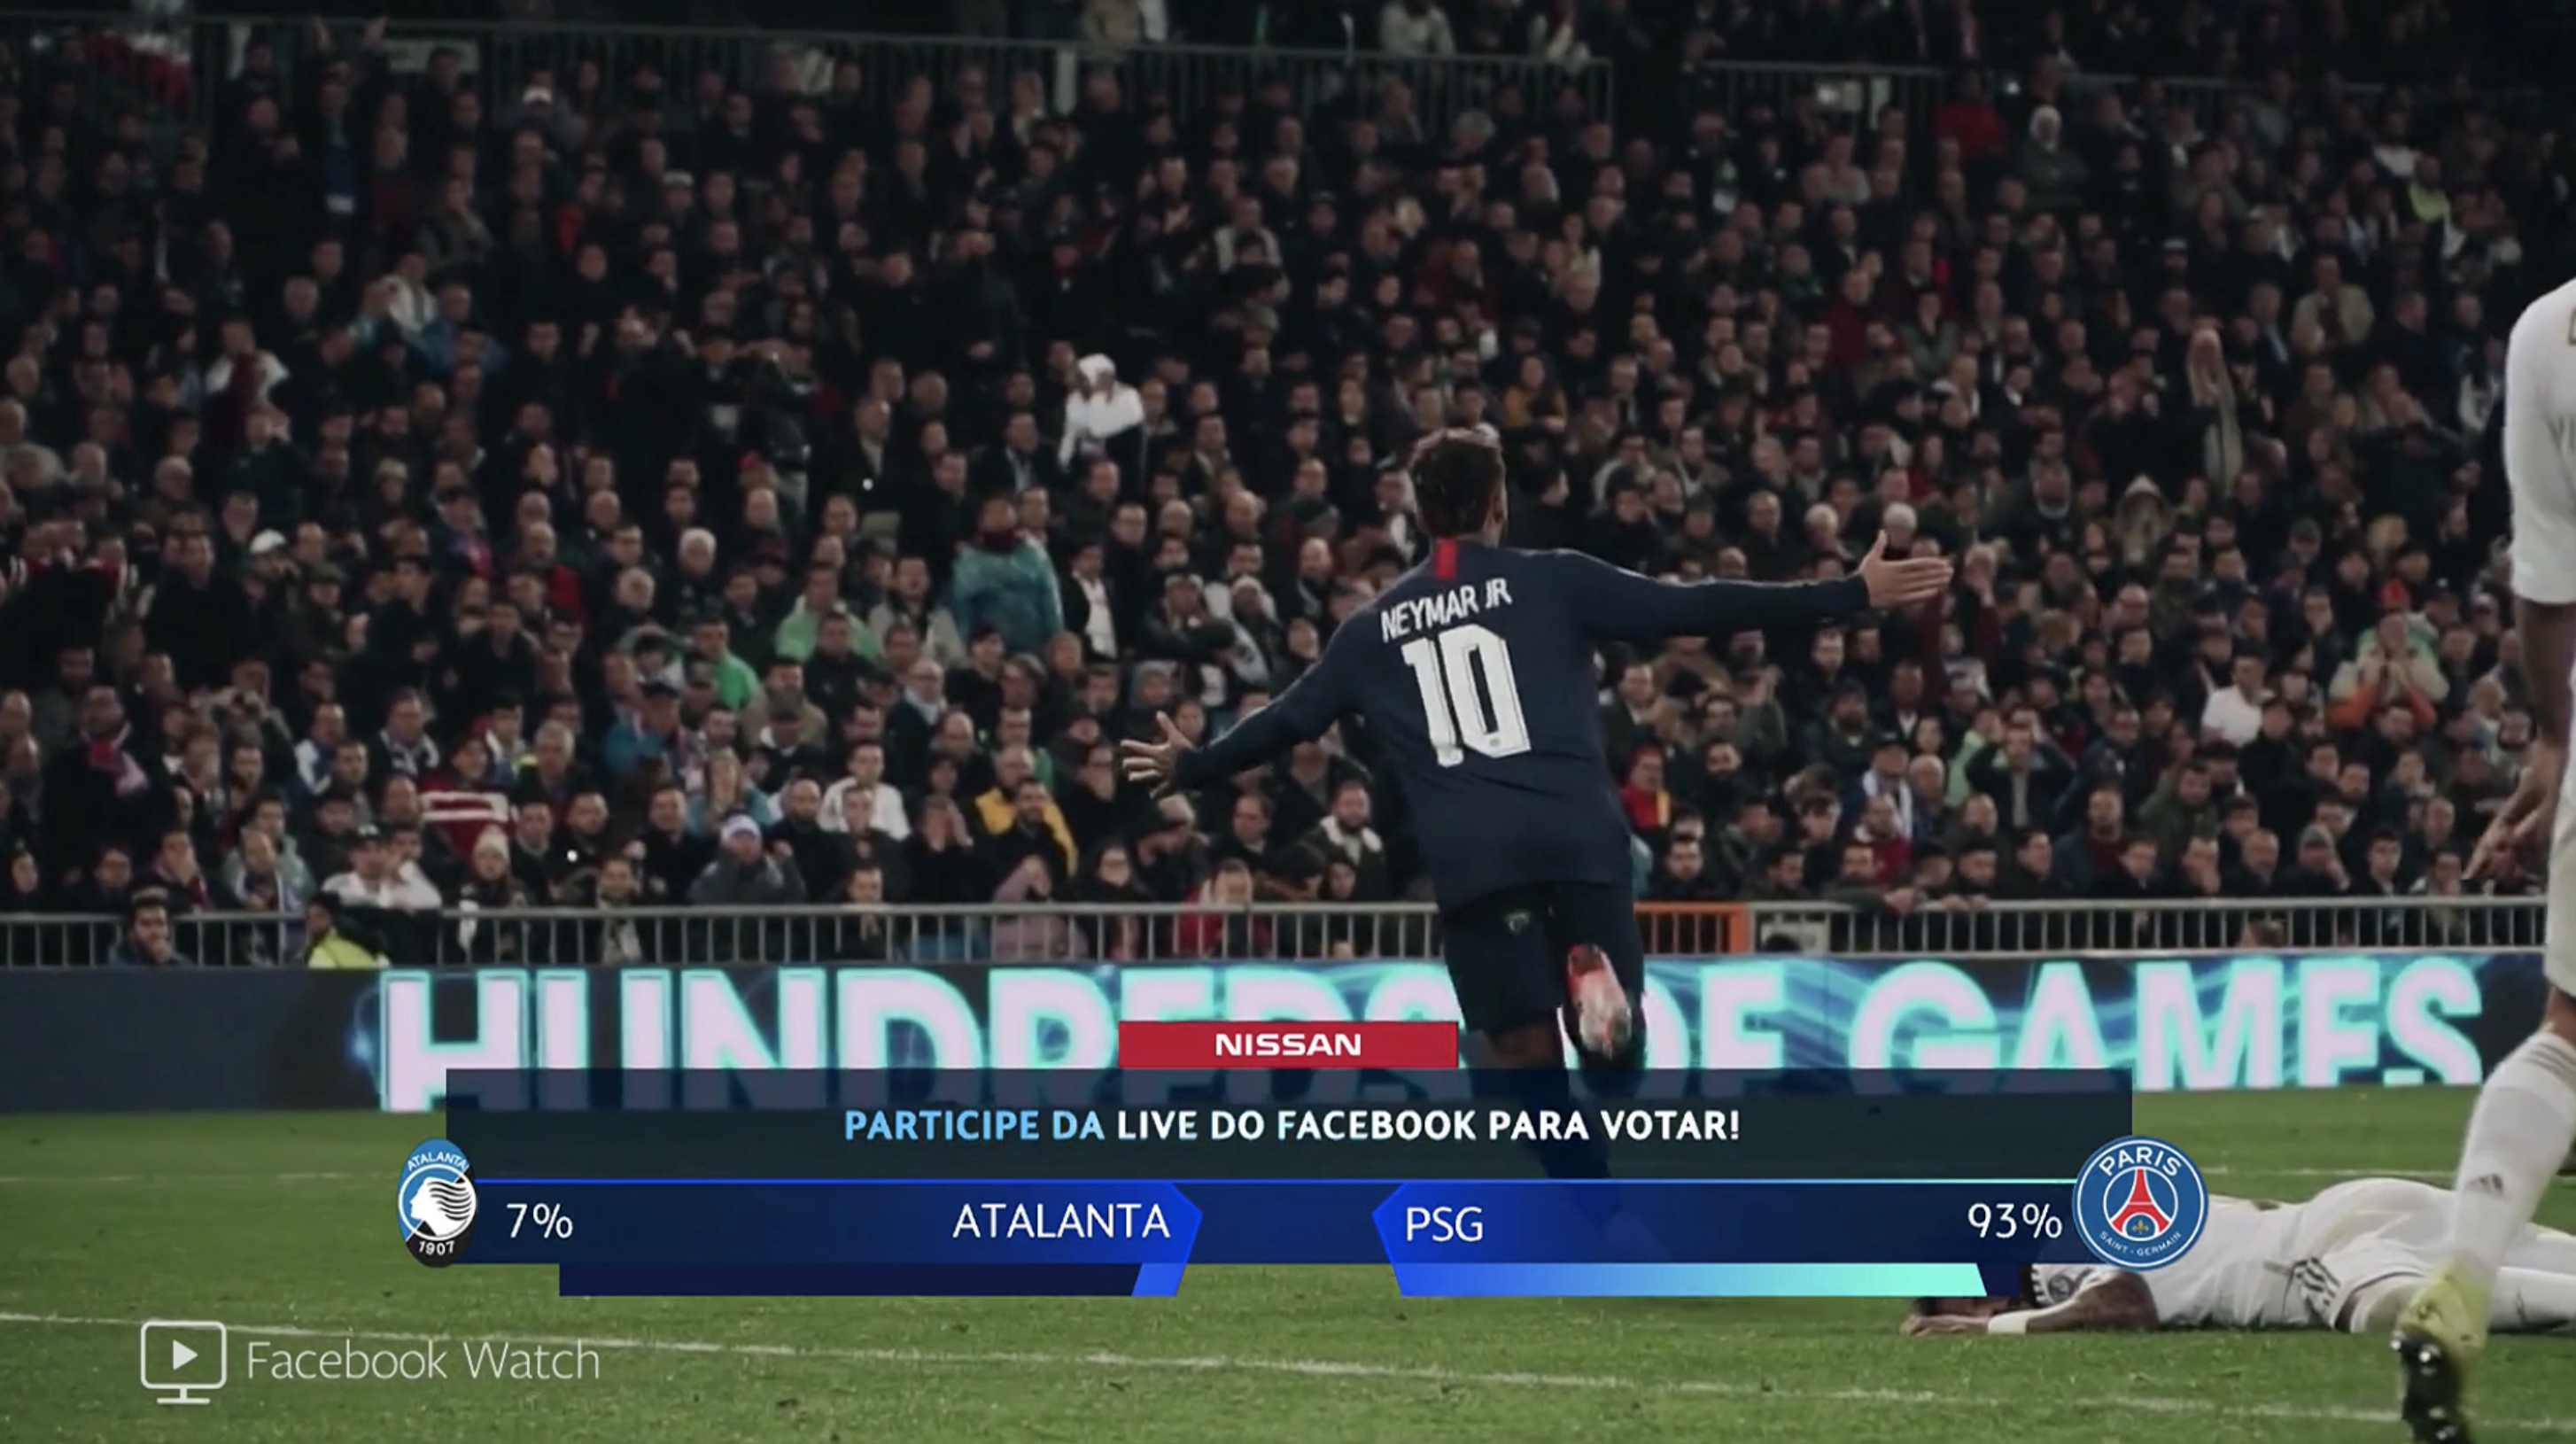 Inside Facebooks Live-Streaming Infrastructure, Strategy for Select Champions League Matches